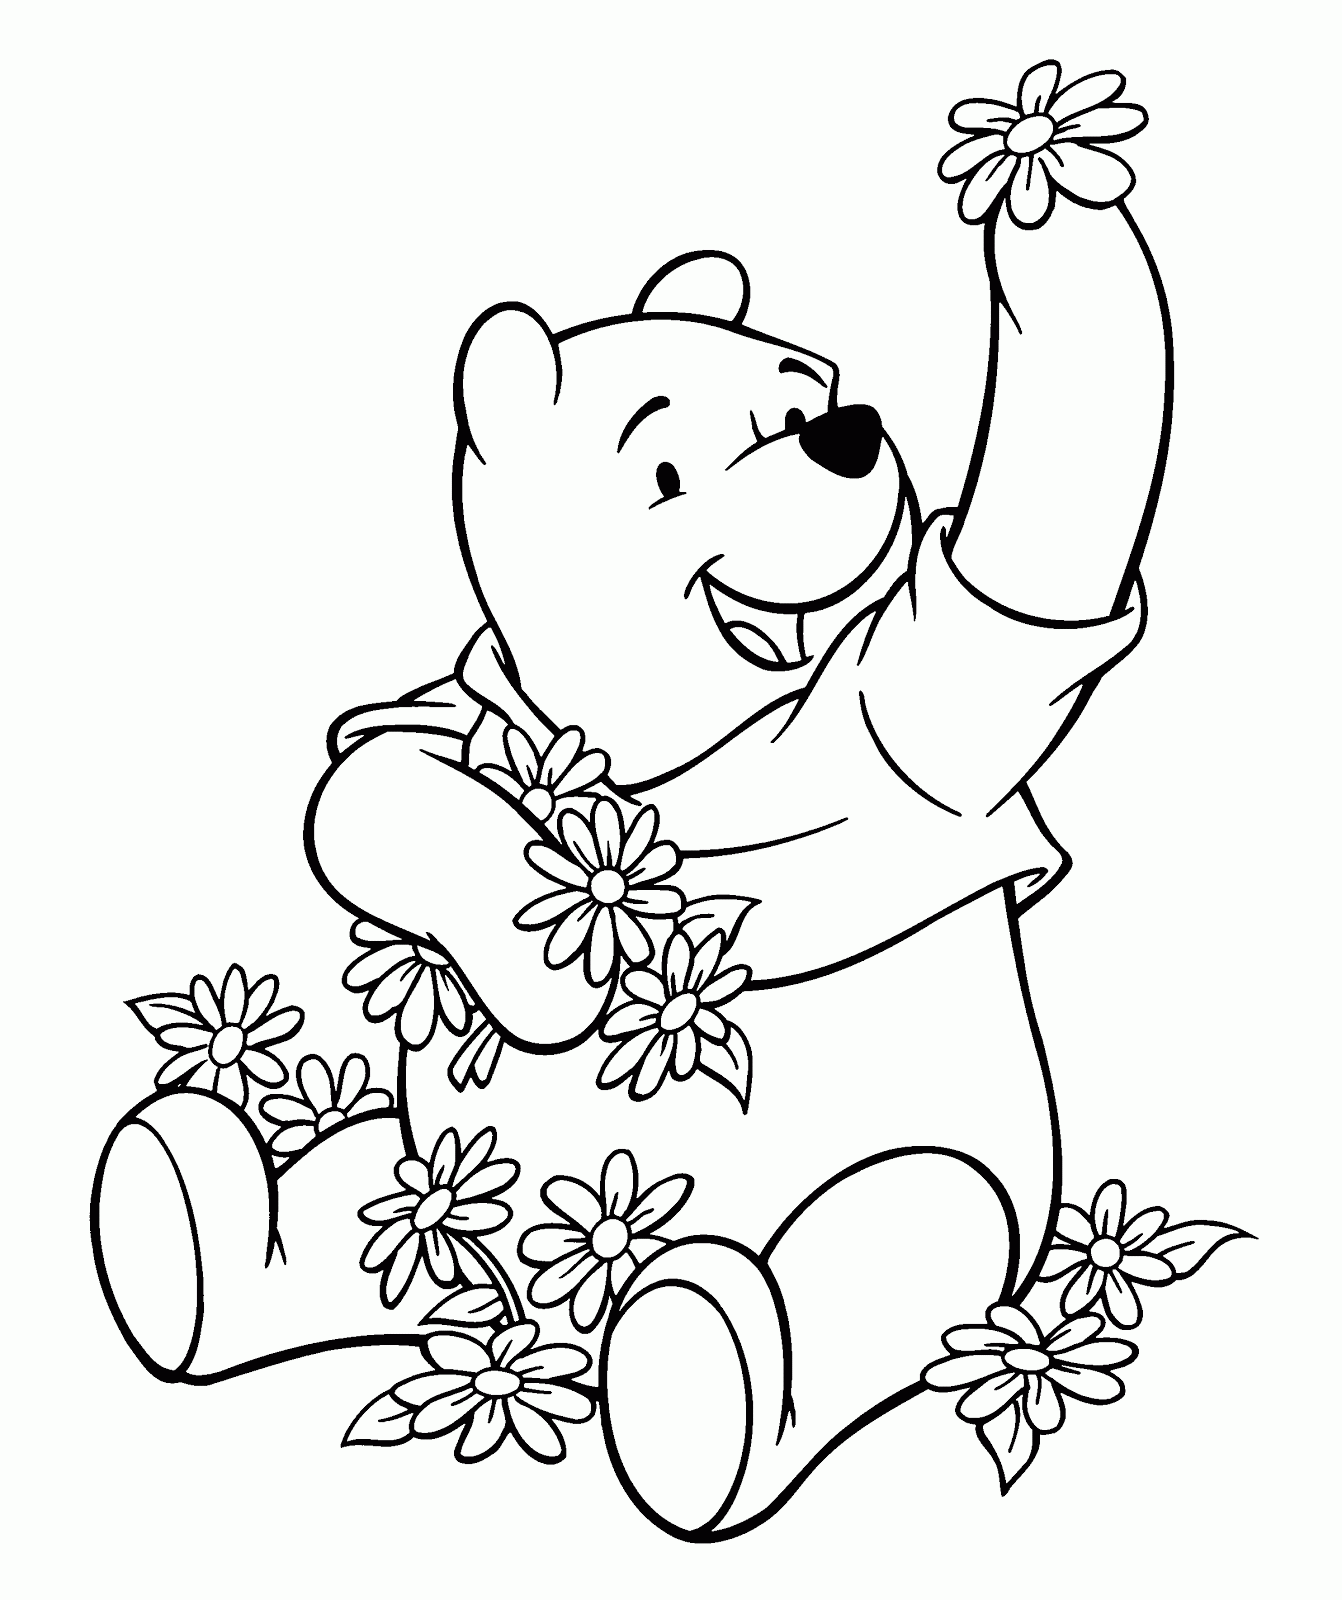 Charactor Coloring Pages 8